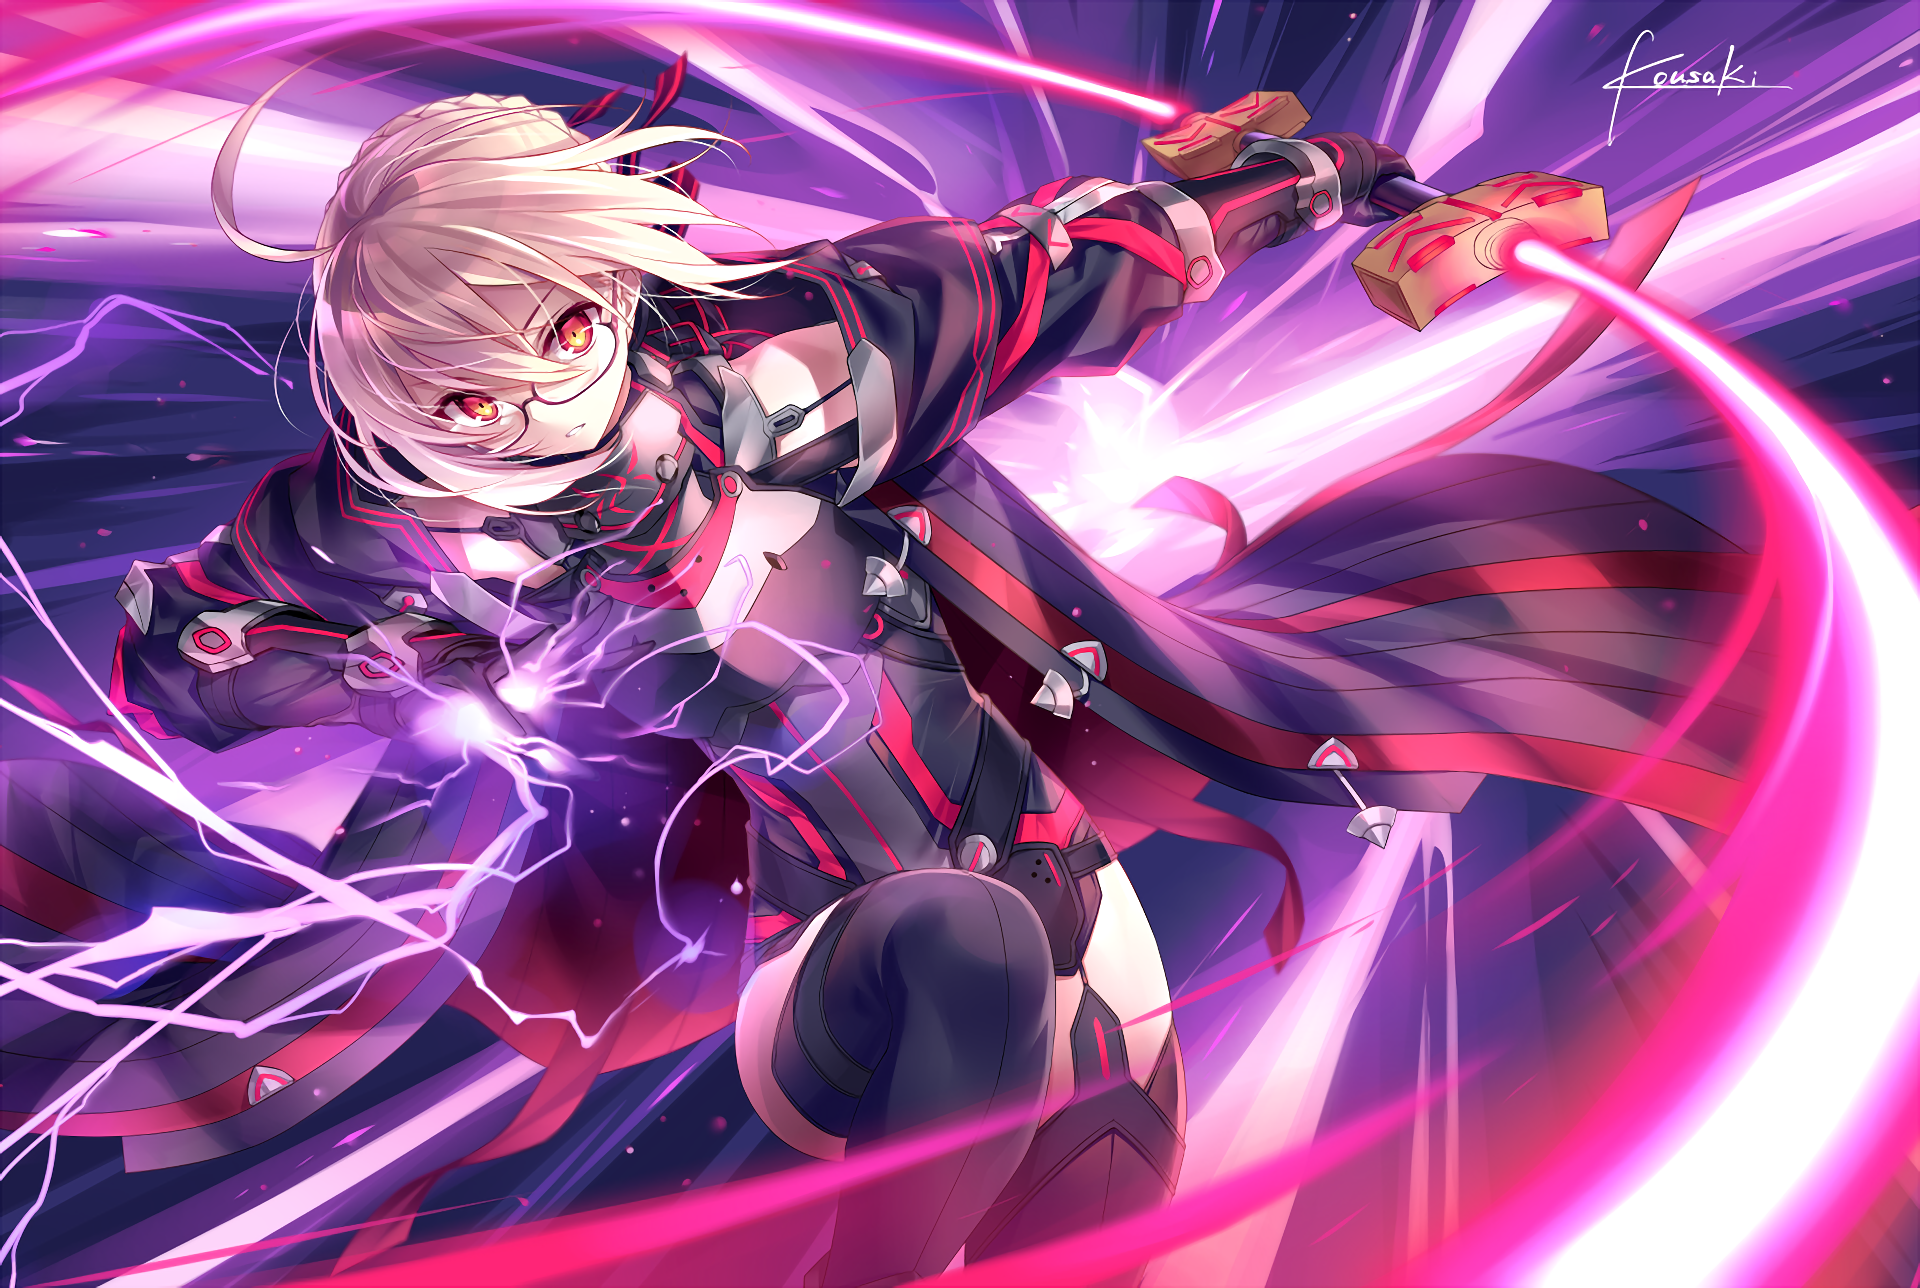 2469 Fate Grand Order Hd Wallpapers Background Images Wallpaper Abyss